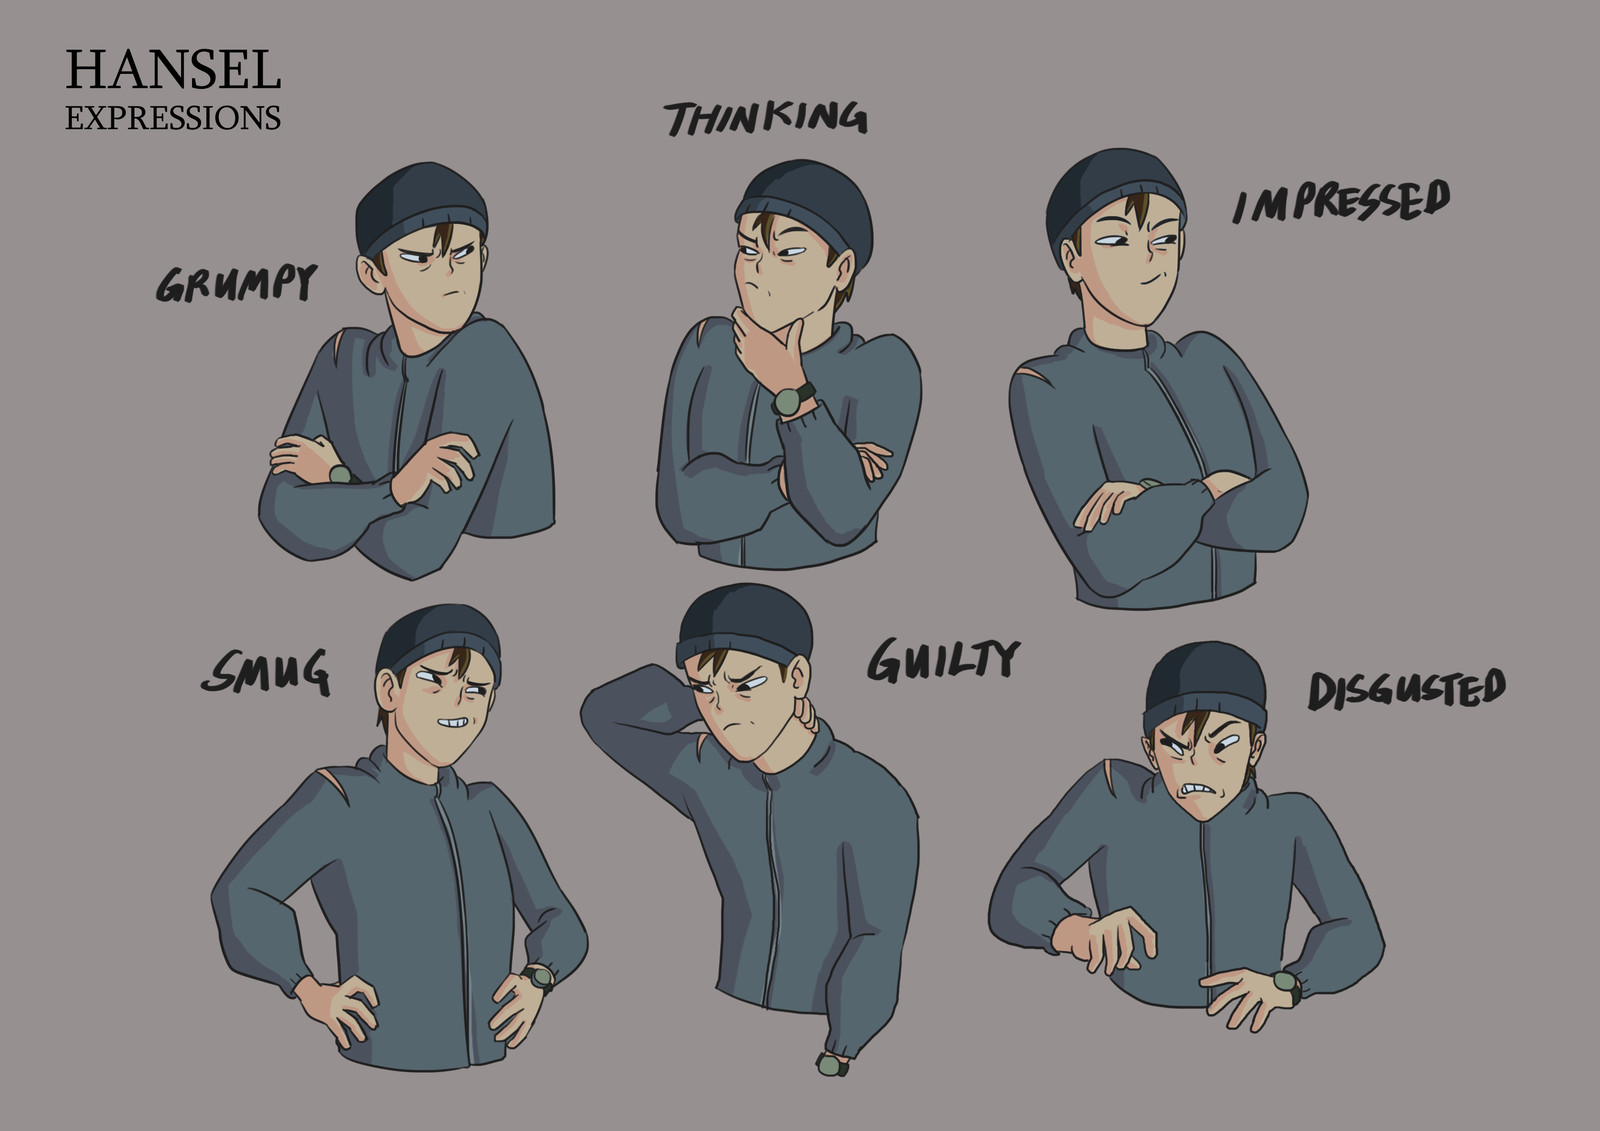 Hansel expressions